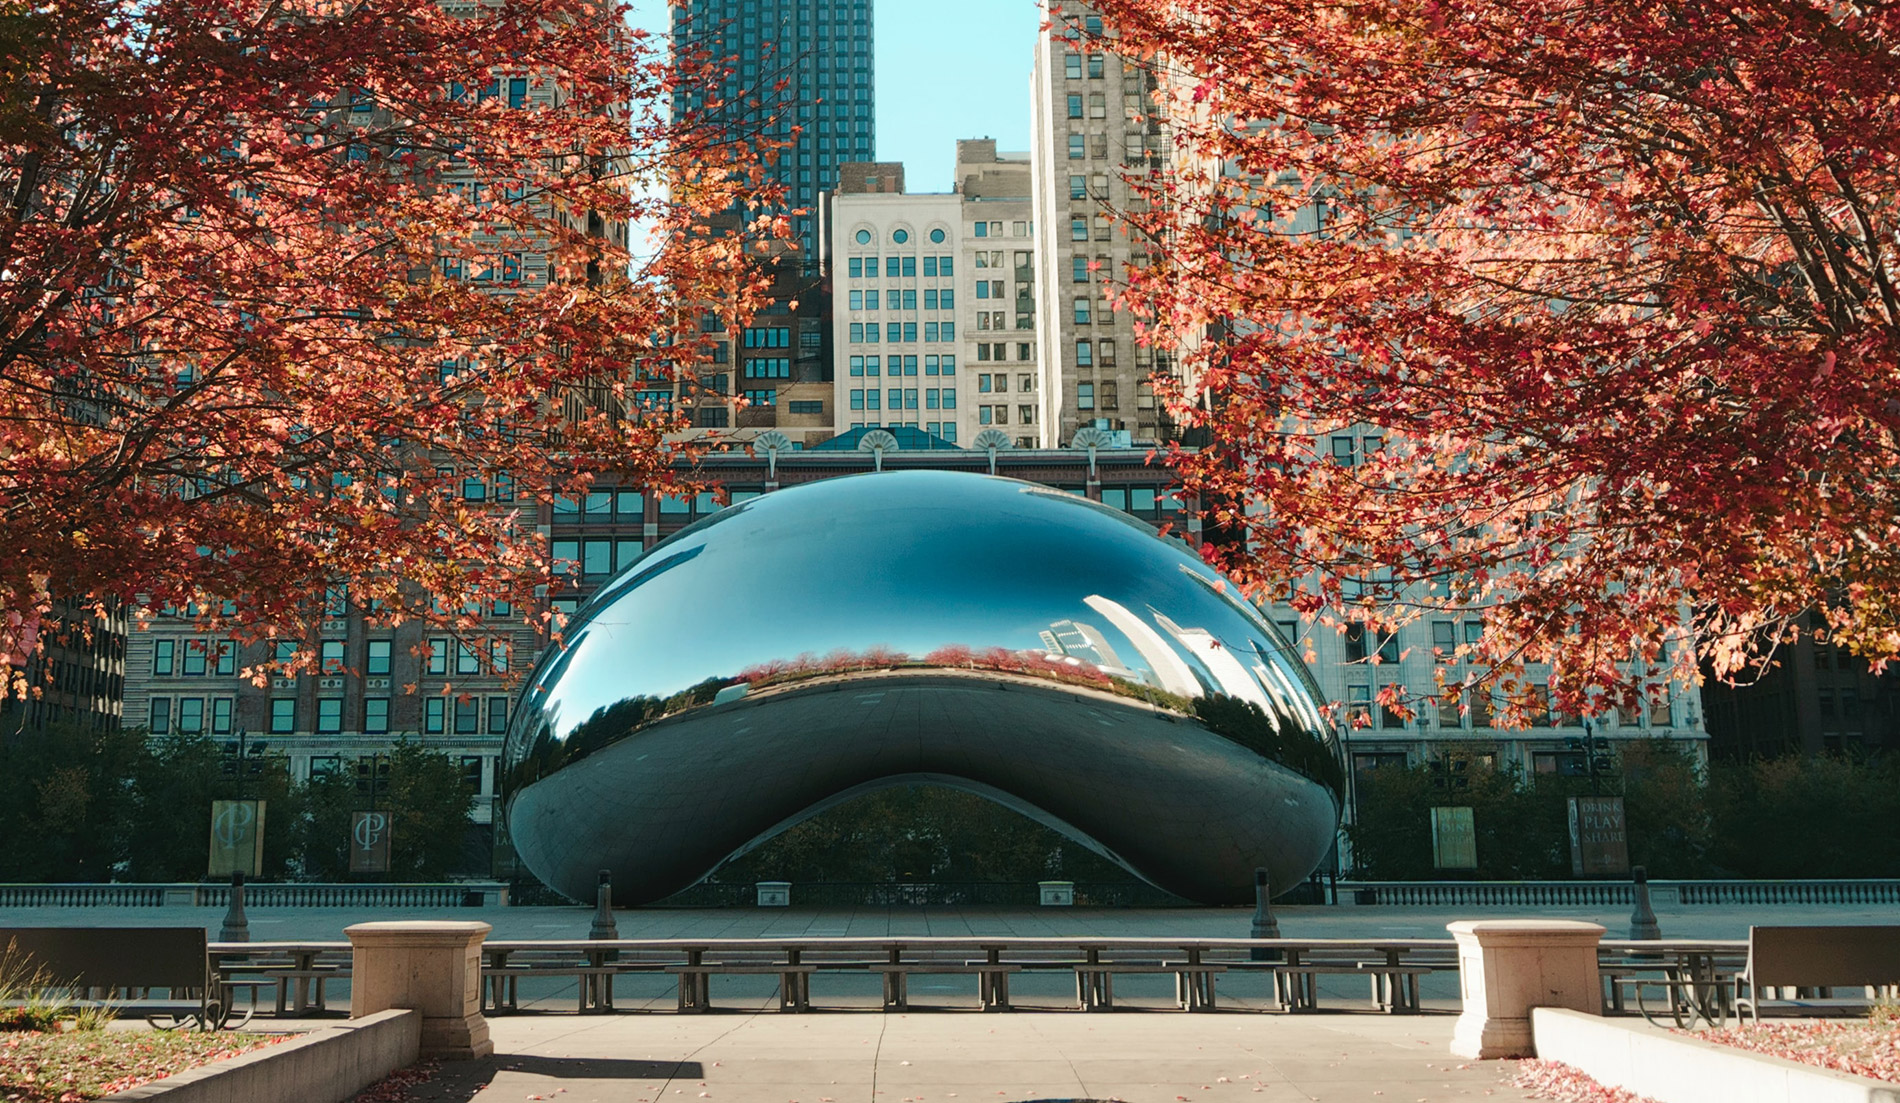 The Bean in the fall